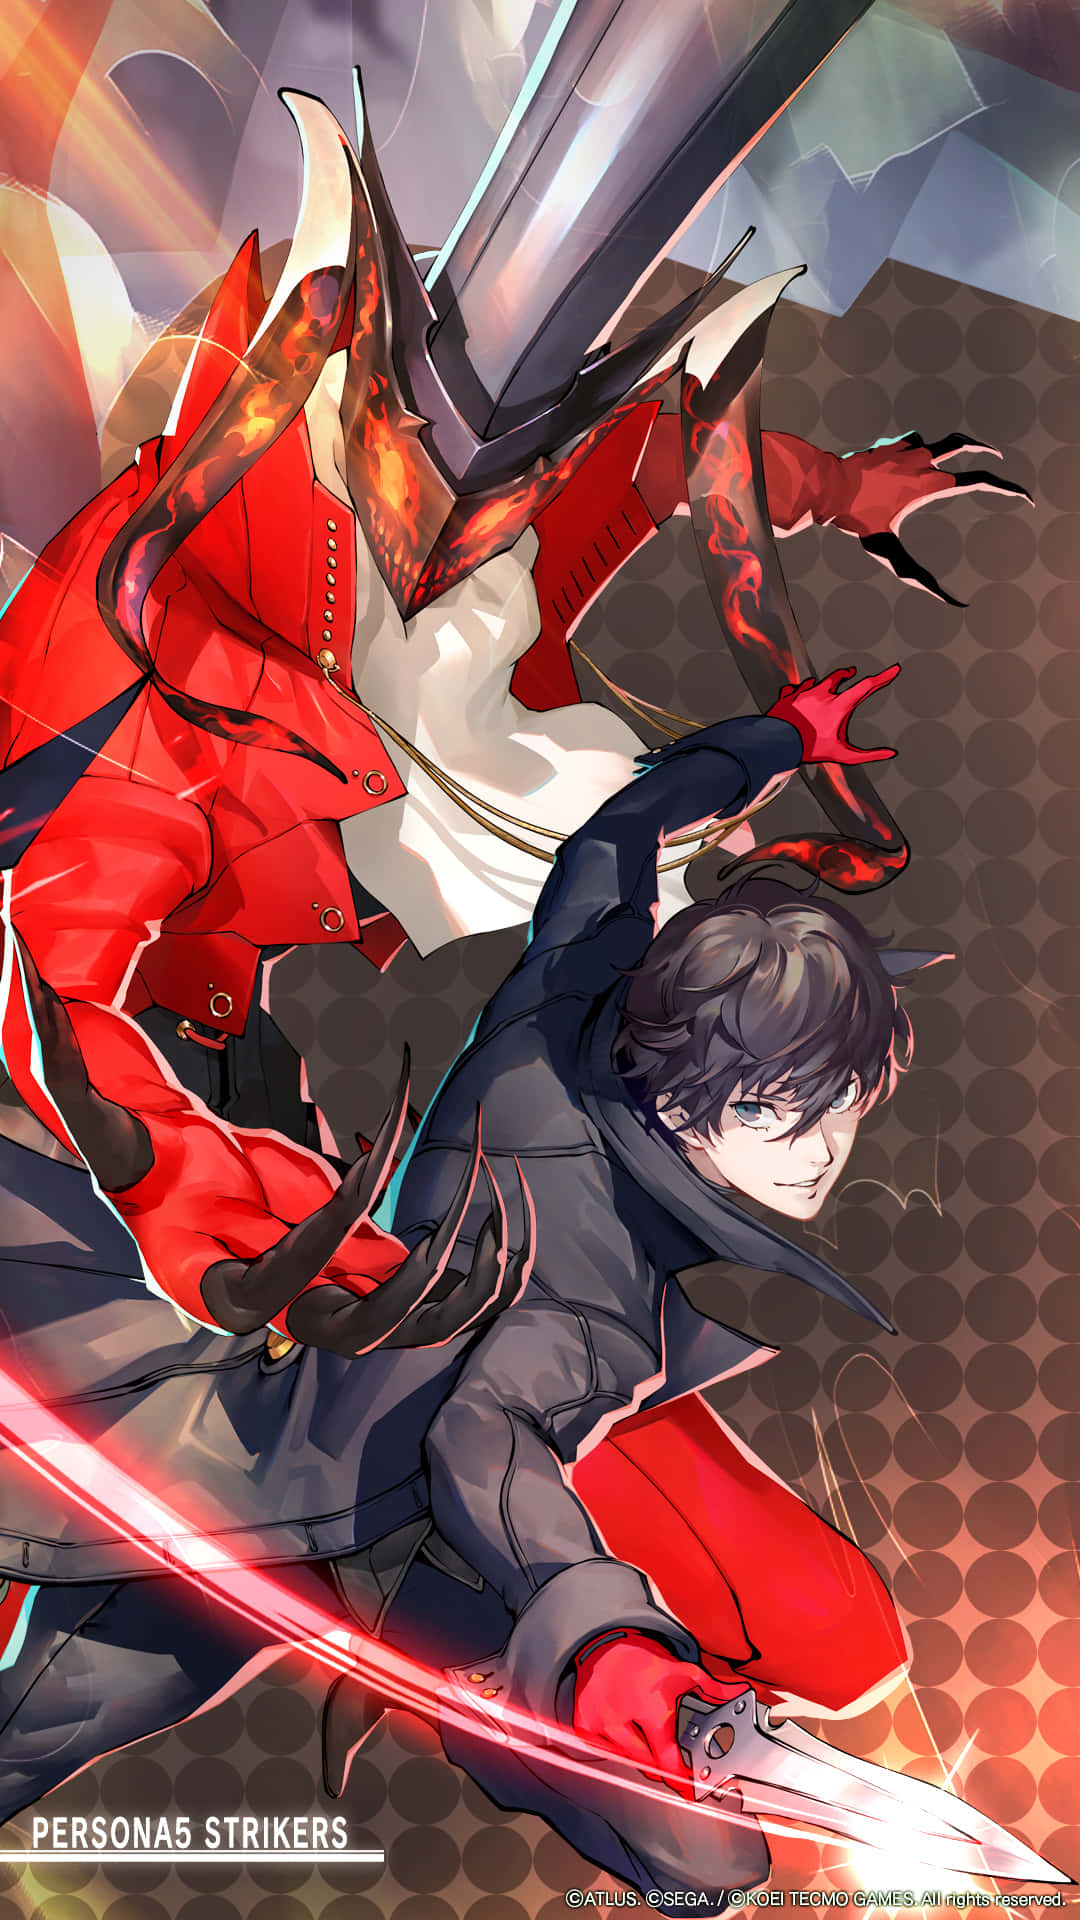 Enjoy your journey with Persona 5 on your iPhone Wallpaper